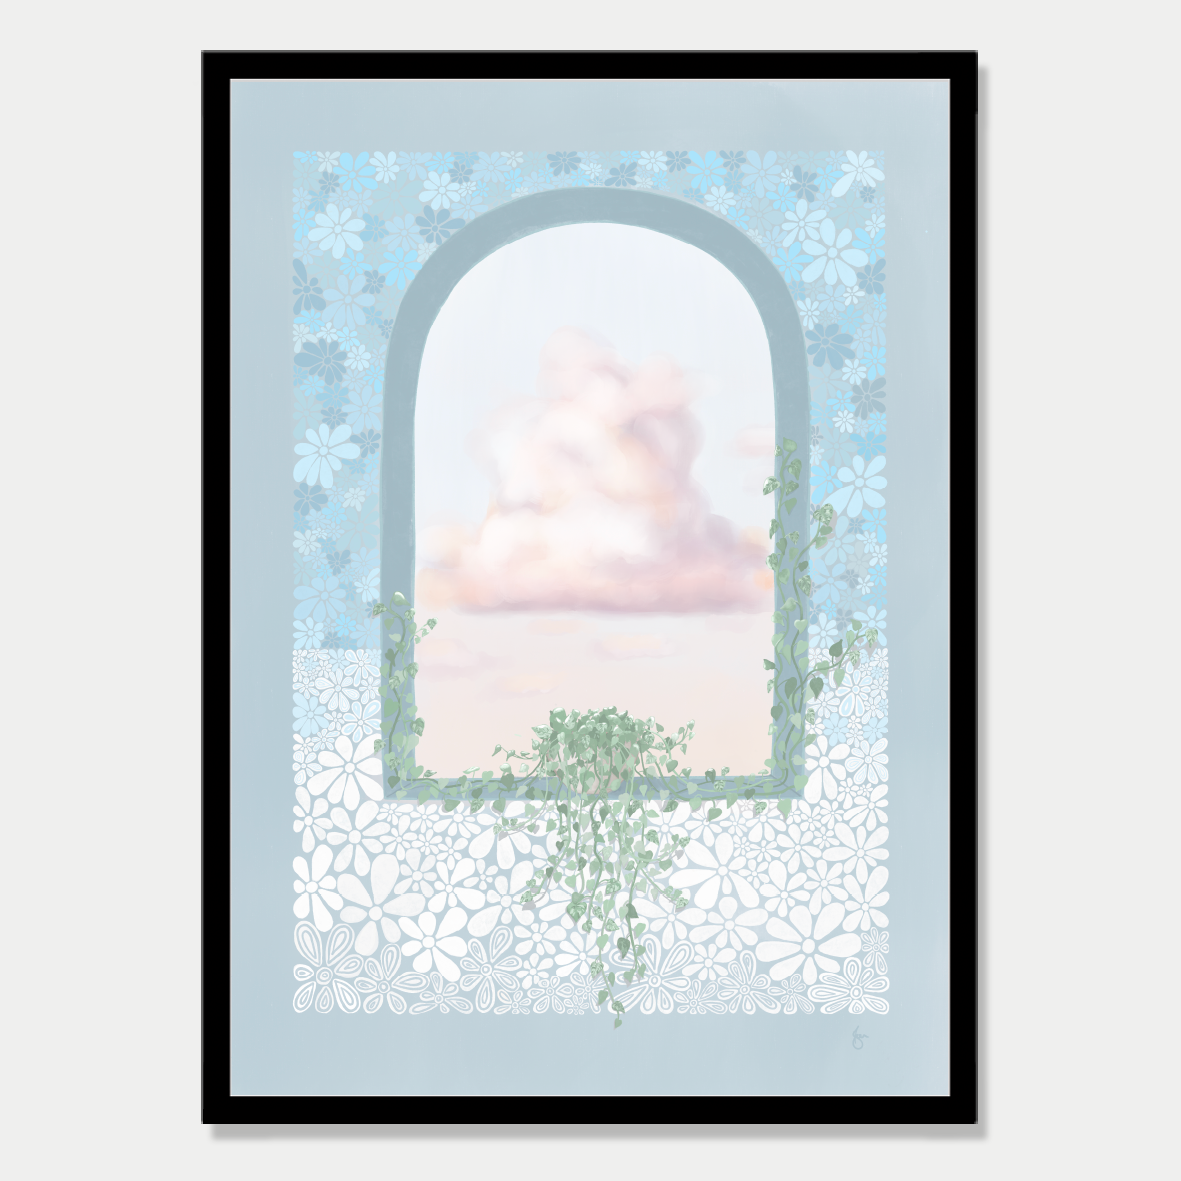 Art print of an arched window with a vine sitting in it, growing up the sides and a view of fluffy clouds, in a stone blue colour palette, by Bon Jung. Printed in New Zealand by endemicworld and framed in black.